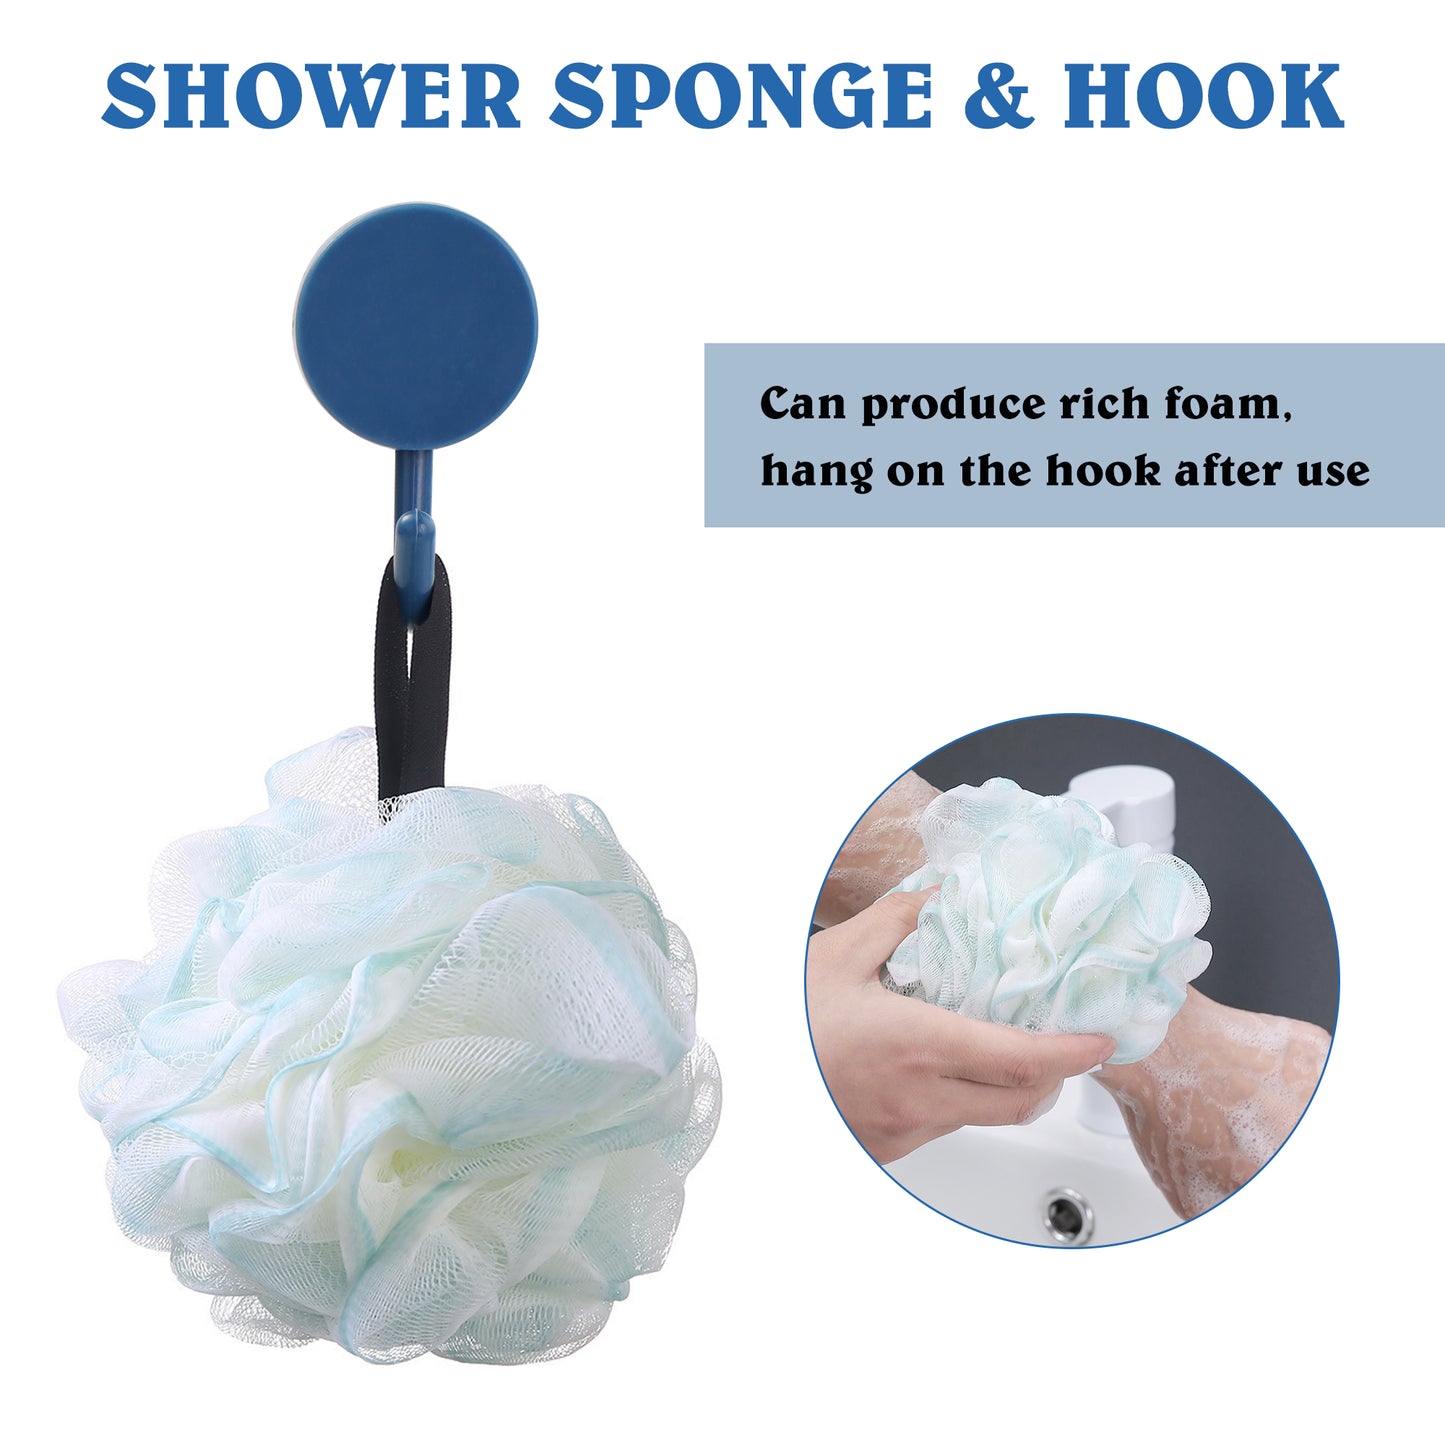 KEKOY 2 Pack Shower Handles with Shower Pouf and Hook